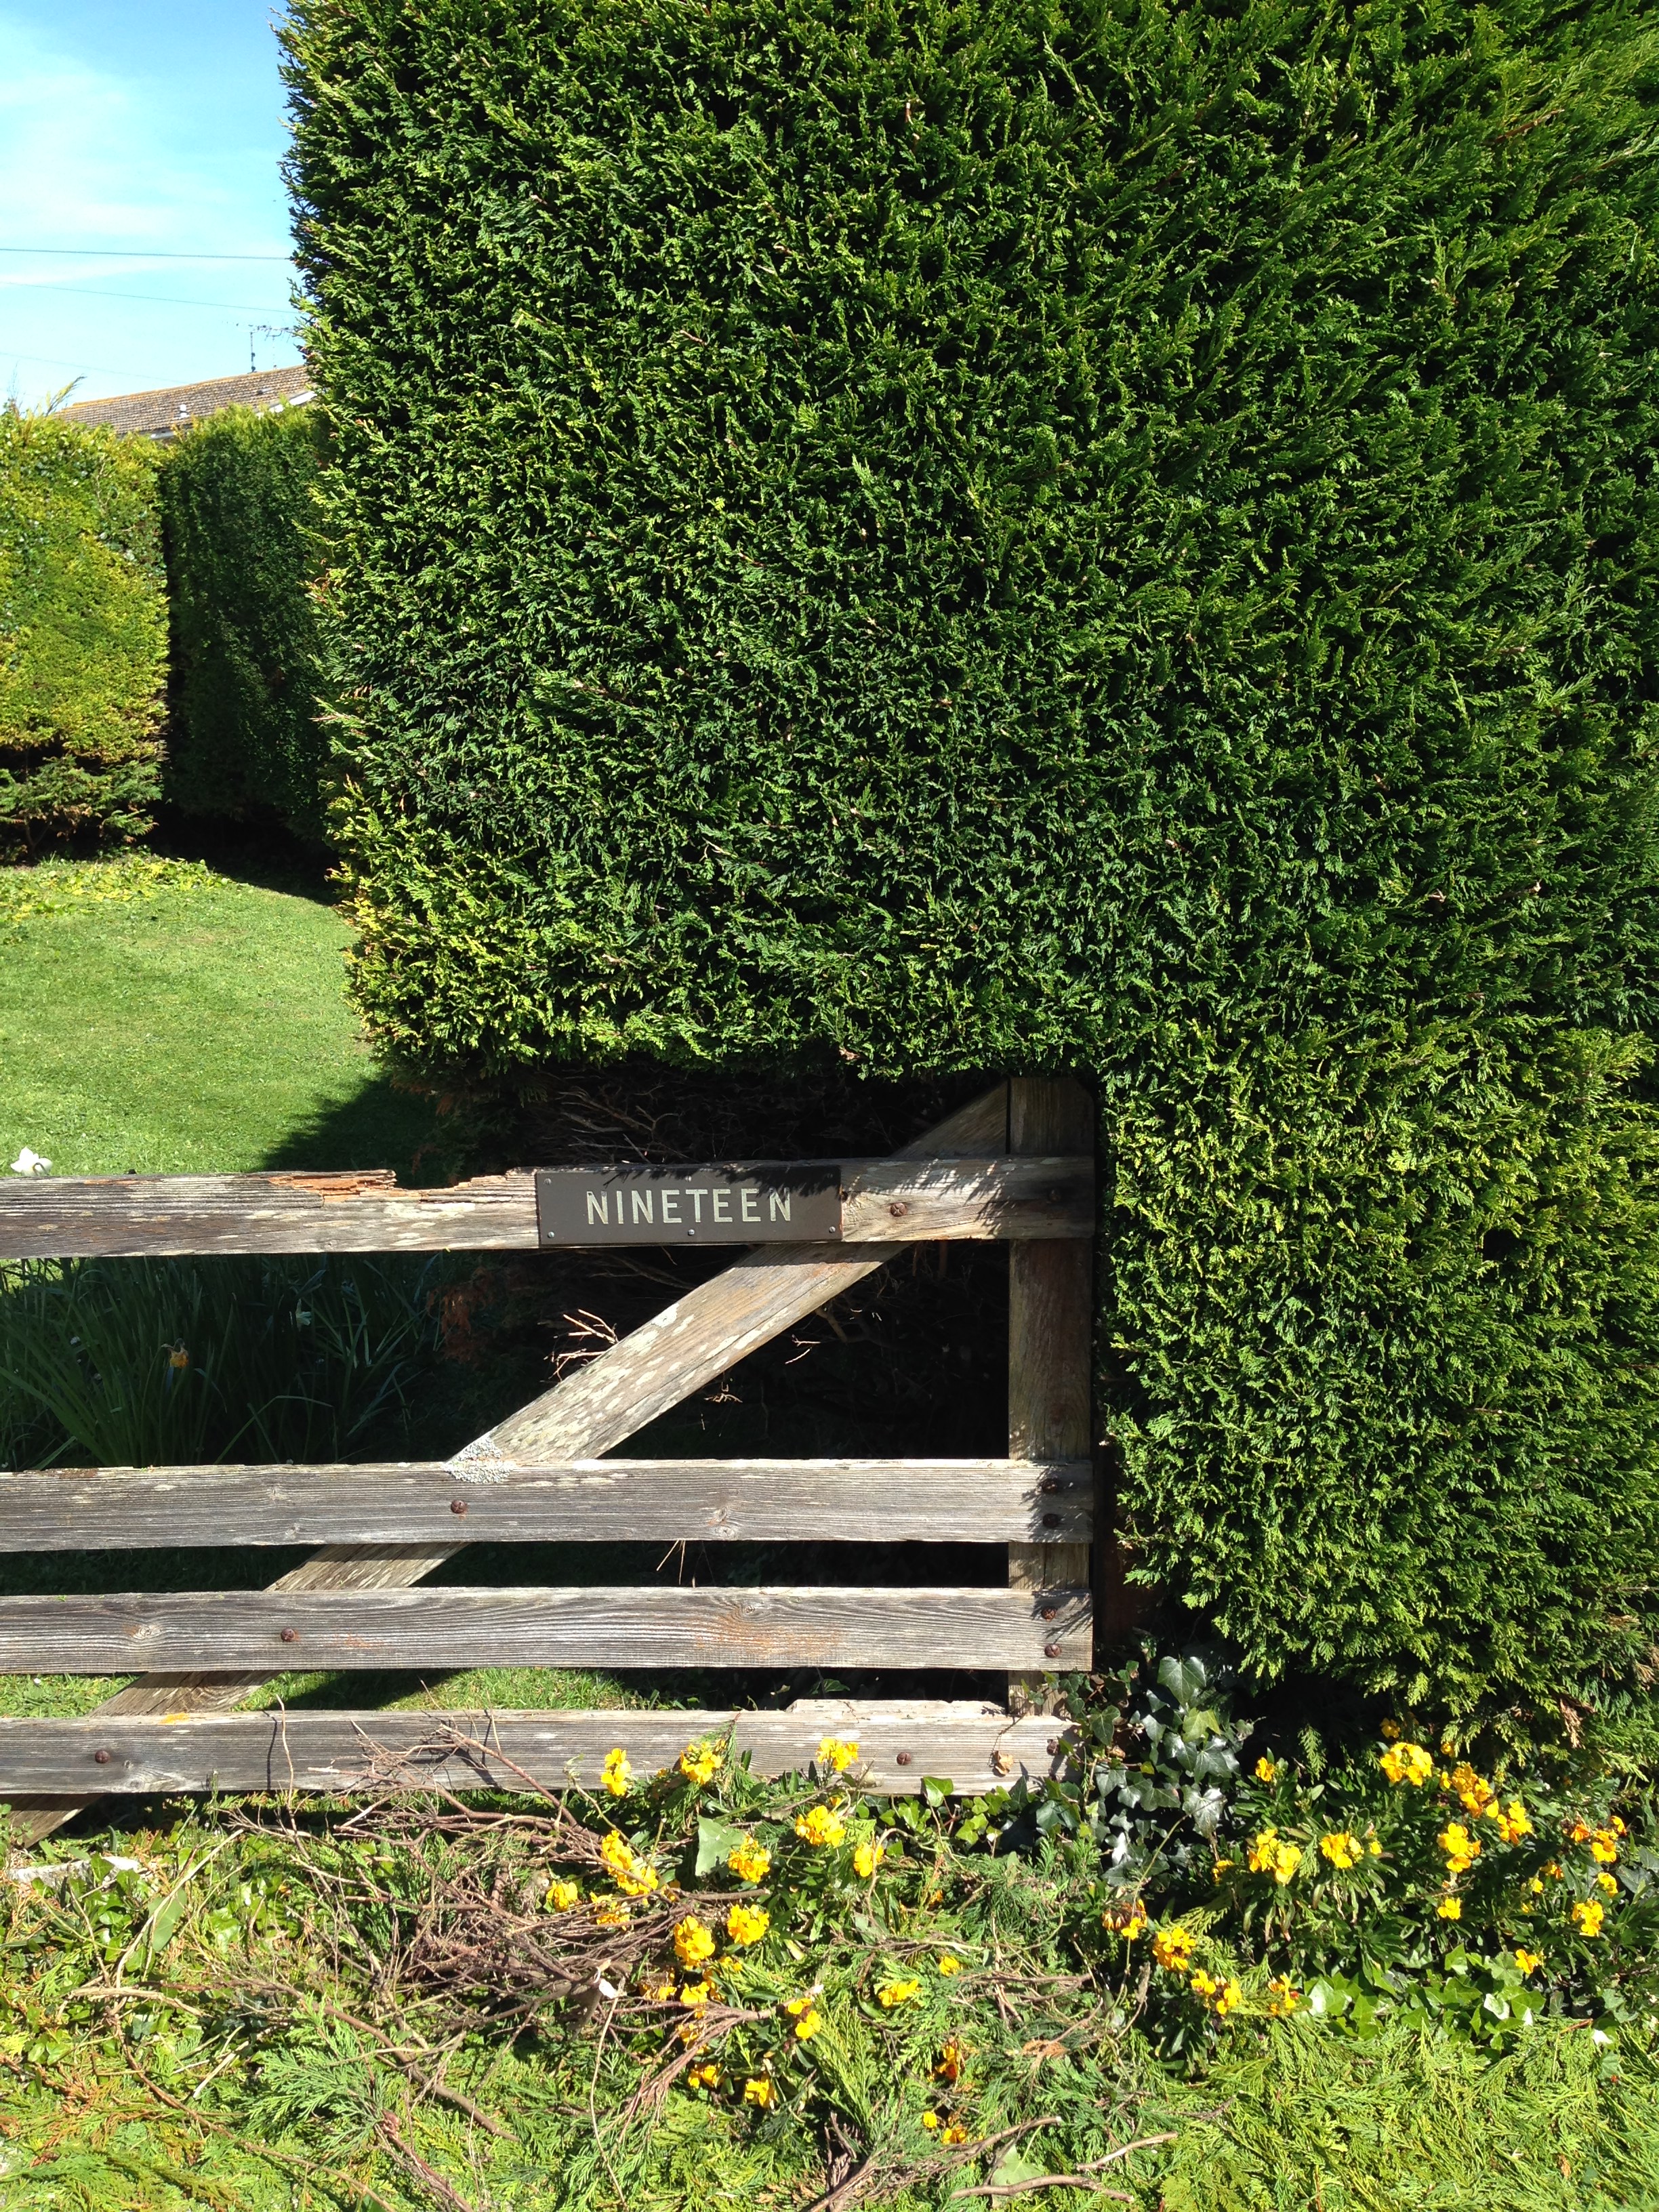 Hedge trimming and removal services Weymouth, Dorchester, Portland in Dorset - Dorset Treeworx offer hedge maintenance, hedge cutting, hedge removal, hedge pruning, hedge planting, hedge stump grinding services